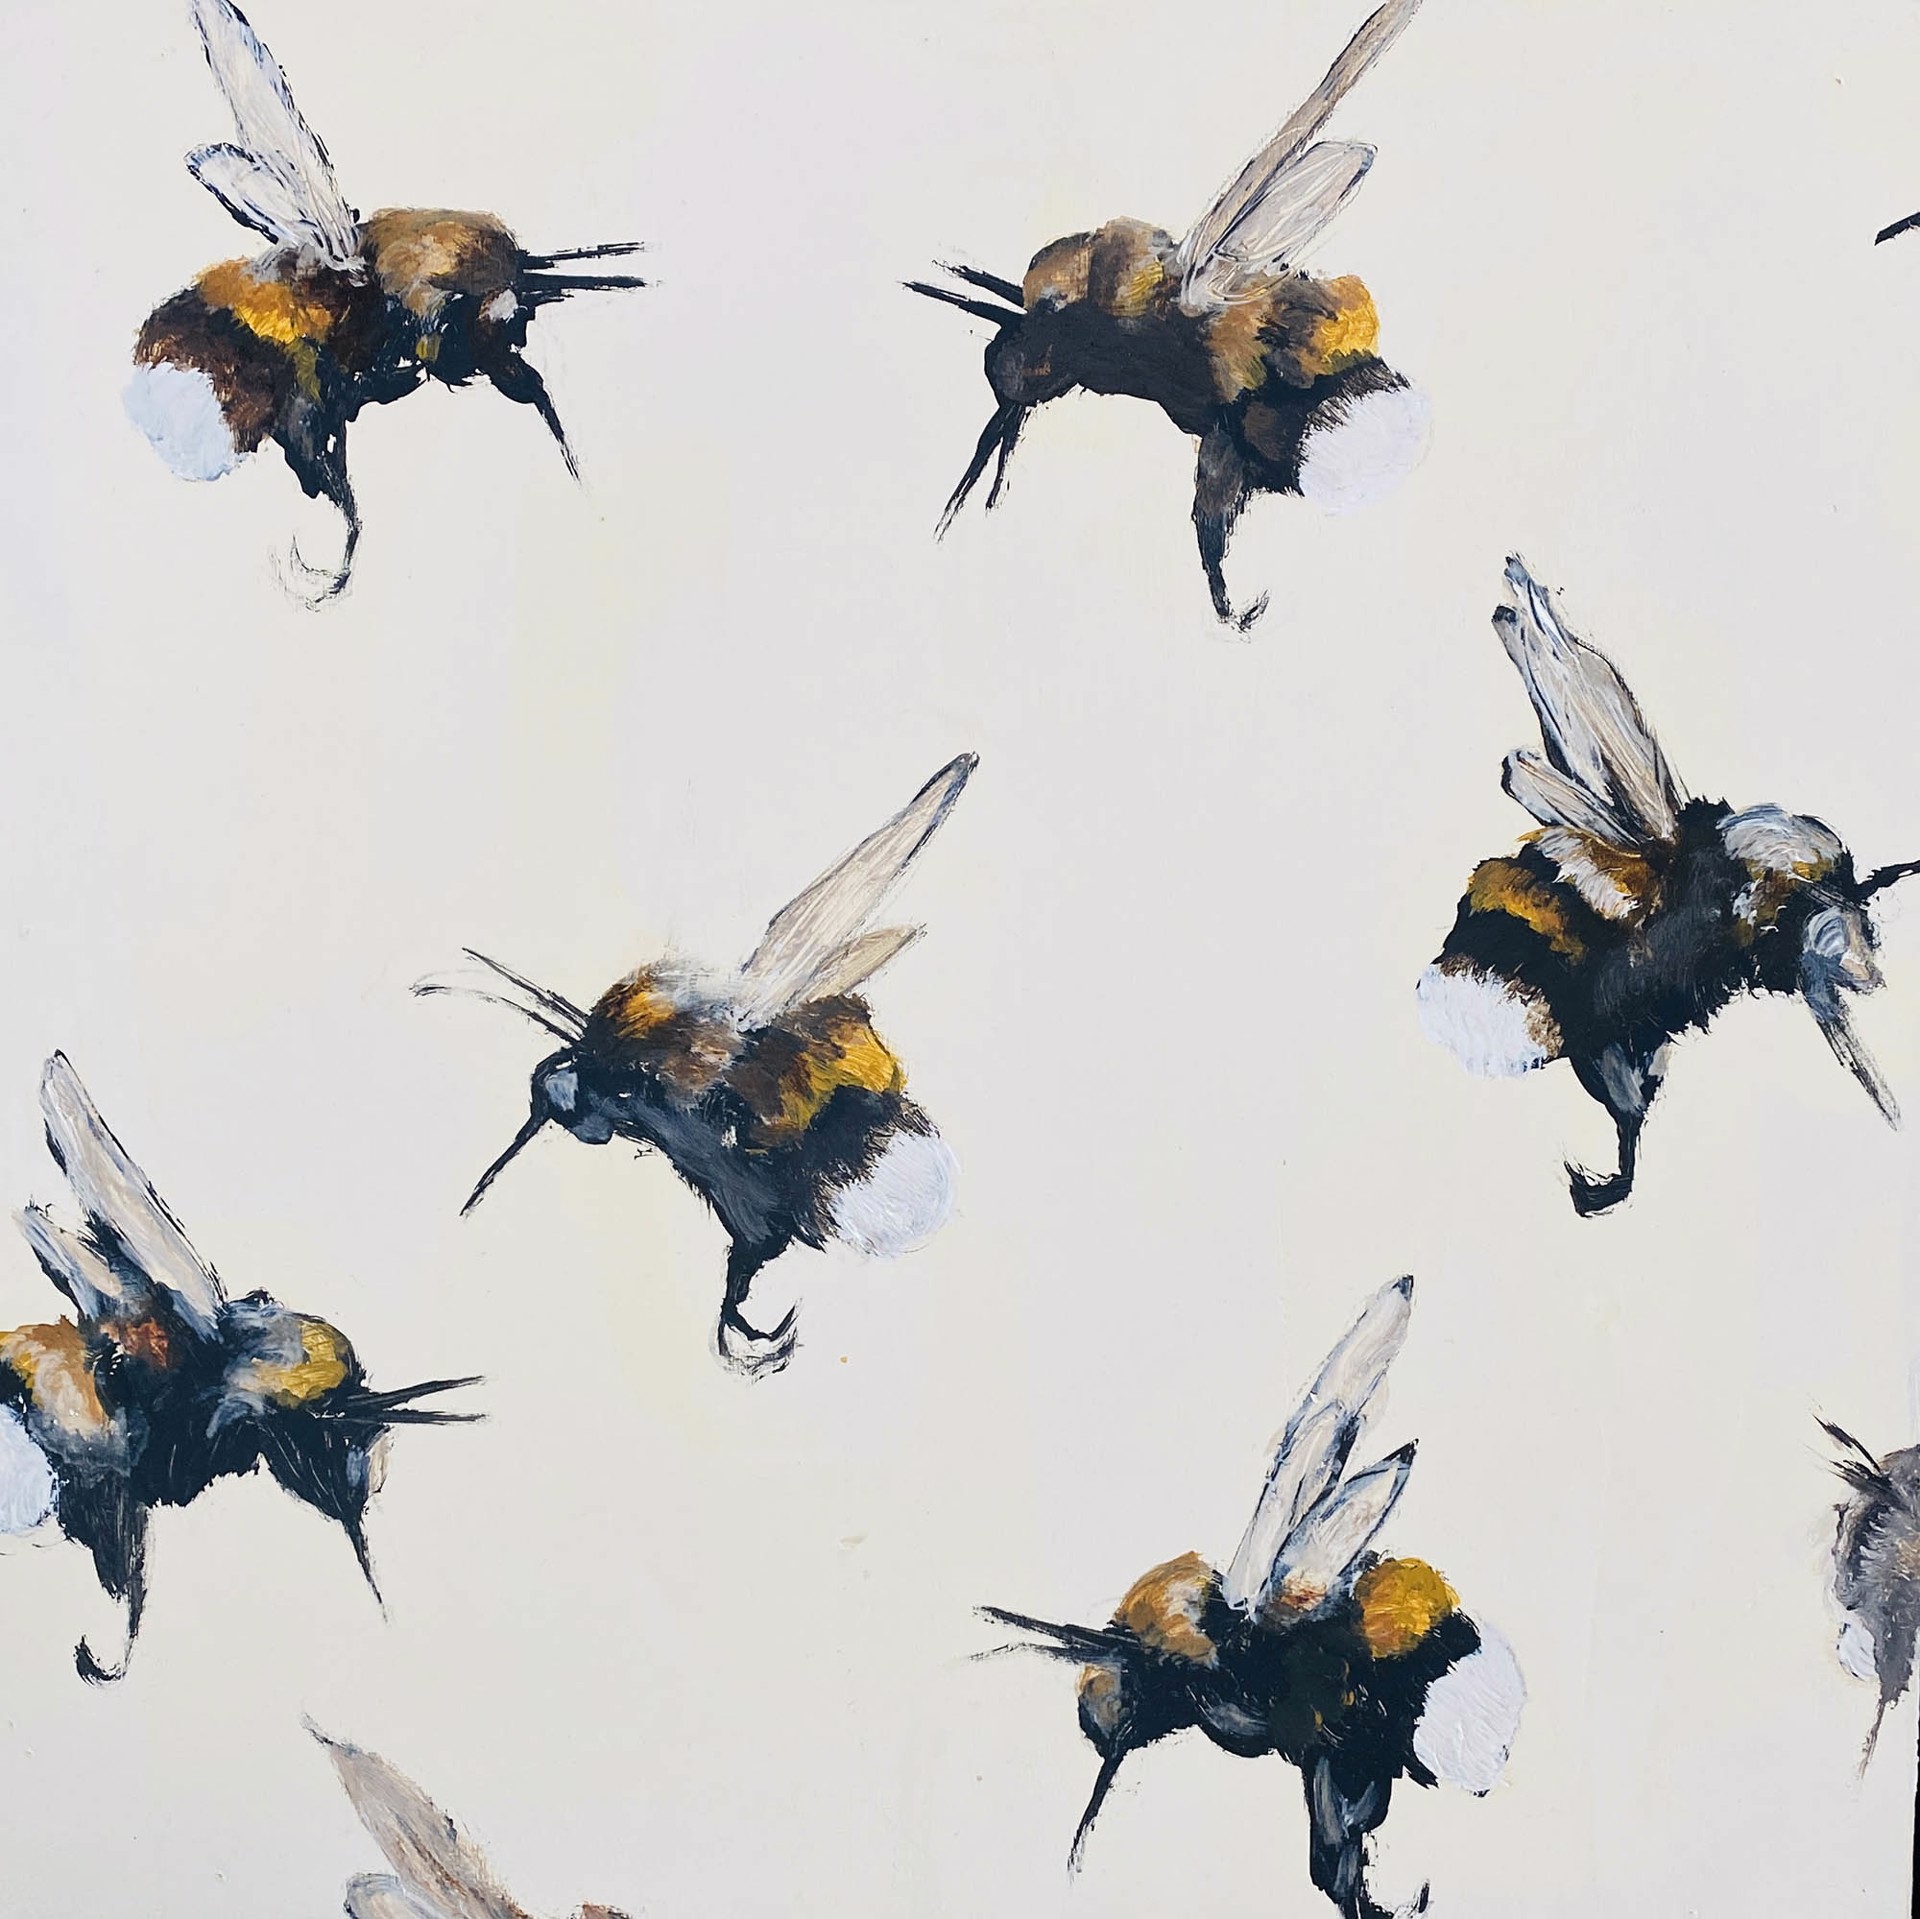 Original Oil Painting Featuring Bumble Bees Over White Background